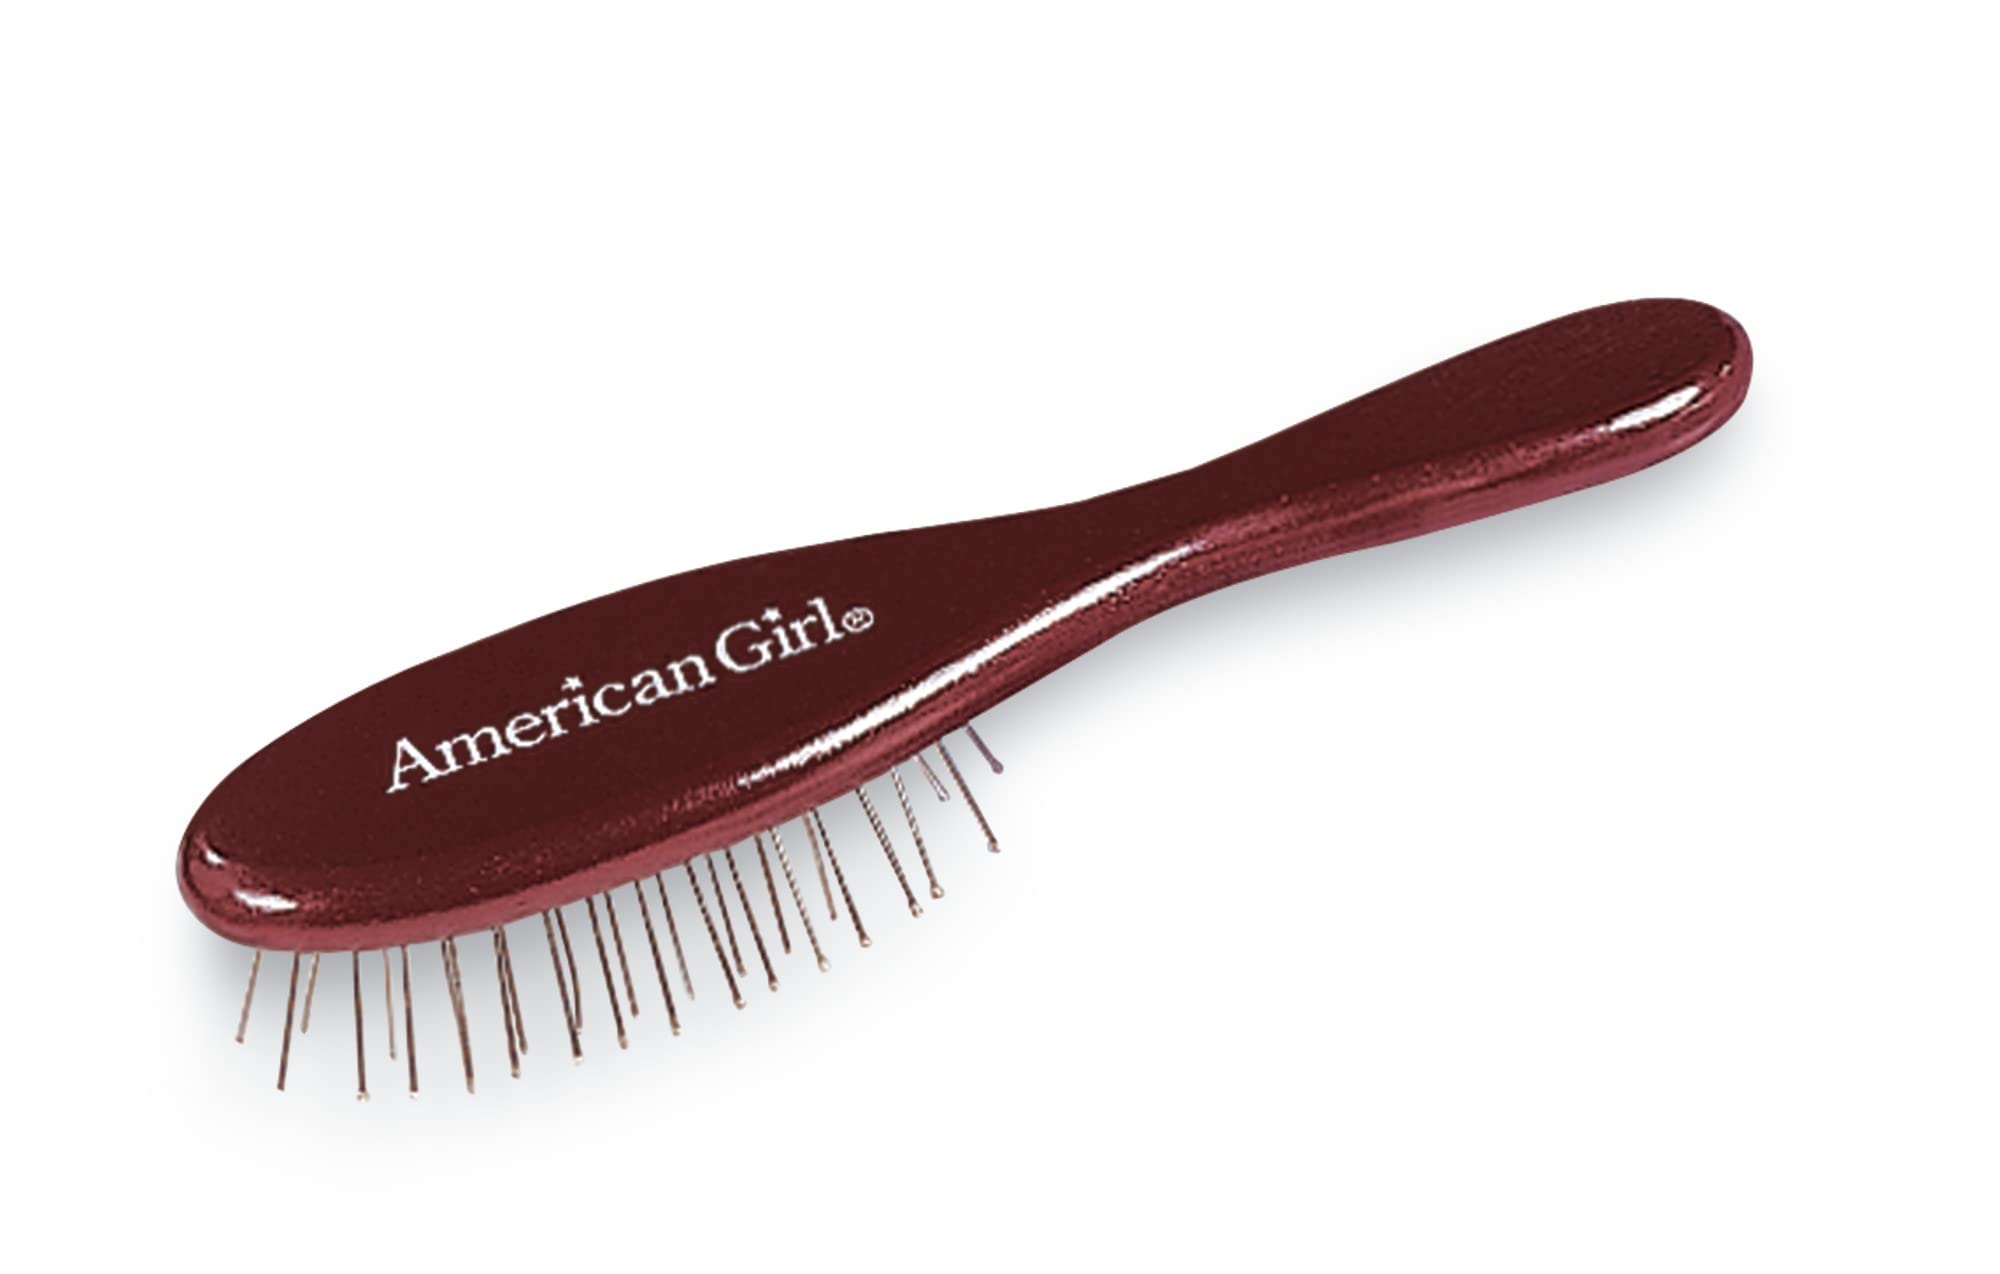 American Girl Doll Brush for Styling 18-inch Doll Hair